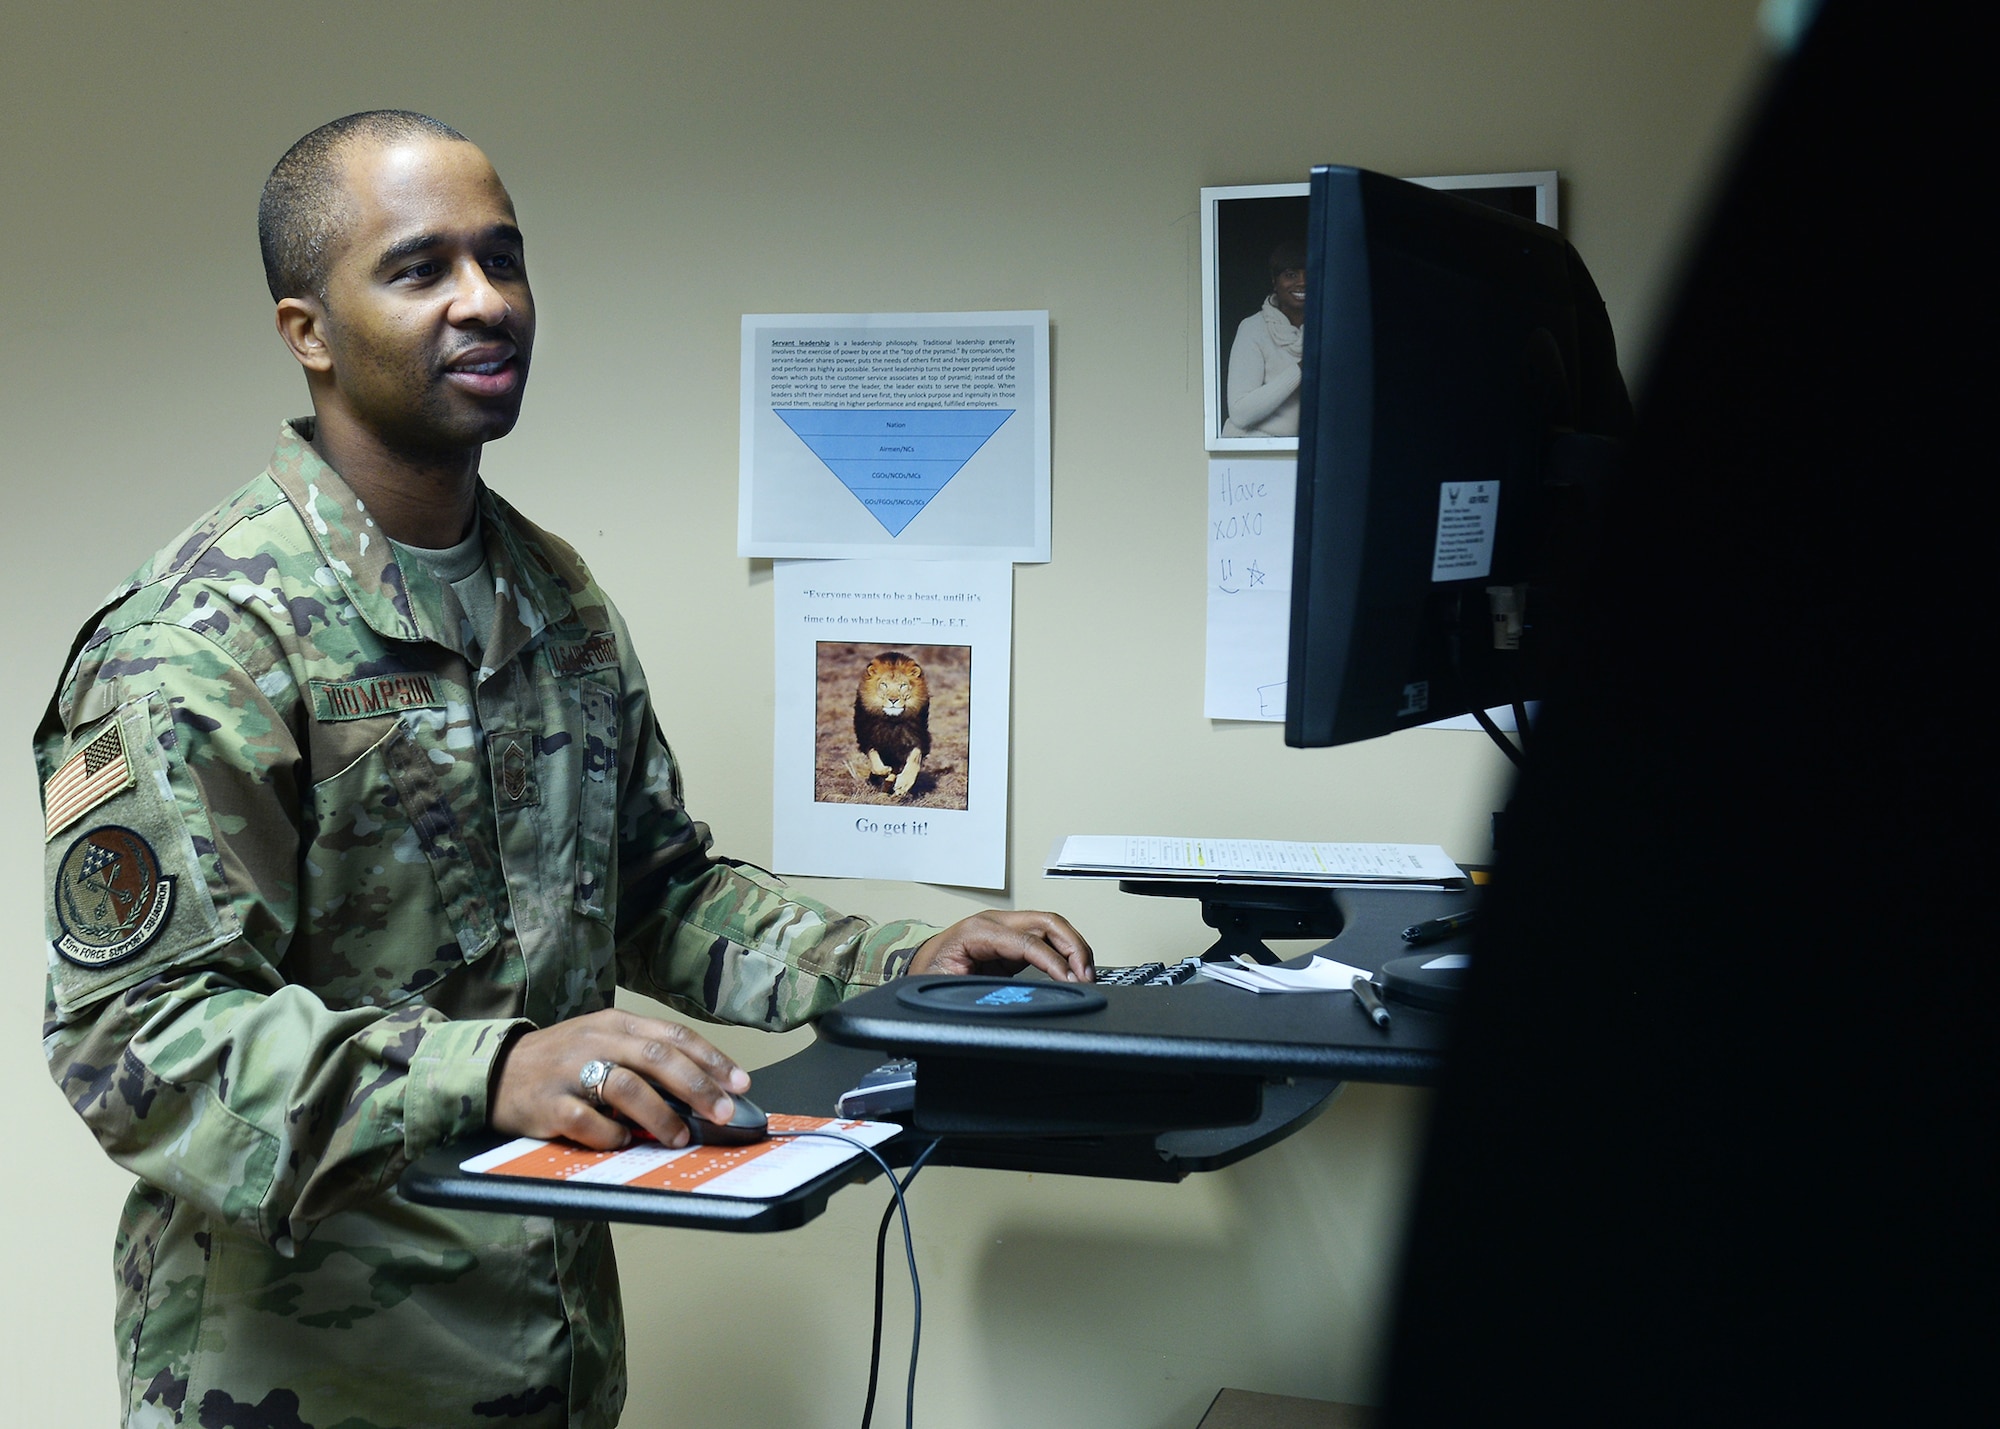 Senior Master Sgt. Anthony Thompson, 55th Force Support Squadron career assistance advisor, looks over his daily planner inside the Chief Master Sgt. James M. McCoy Airmen Leadership school at Offutt Air Force Base, Nebraska. As the CAA, Thompson manages professional enhancement and development opportunities for all officer, enlisted and civilian members here.